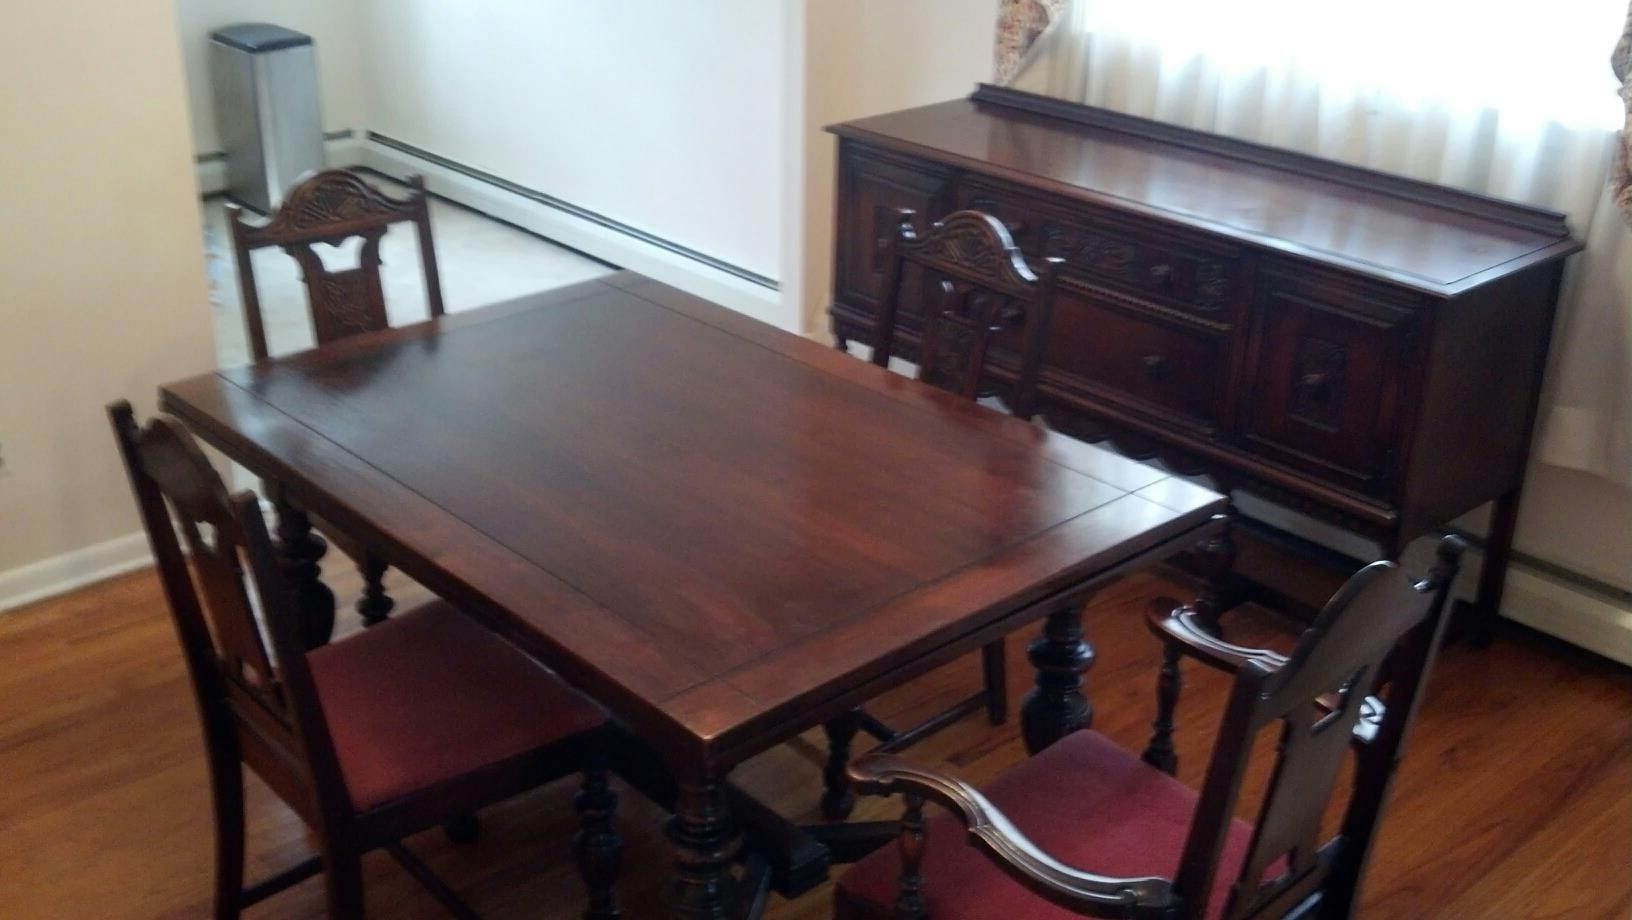 Vintage Dining Room Table Sets Beautiful I Have A 1940s Vintage In 2017 Mahogany Dining Tables Sets (View 13 of 25)